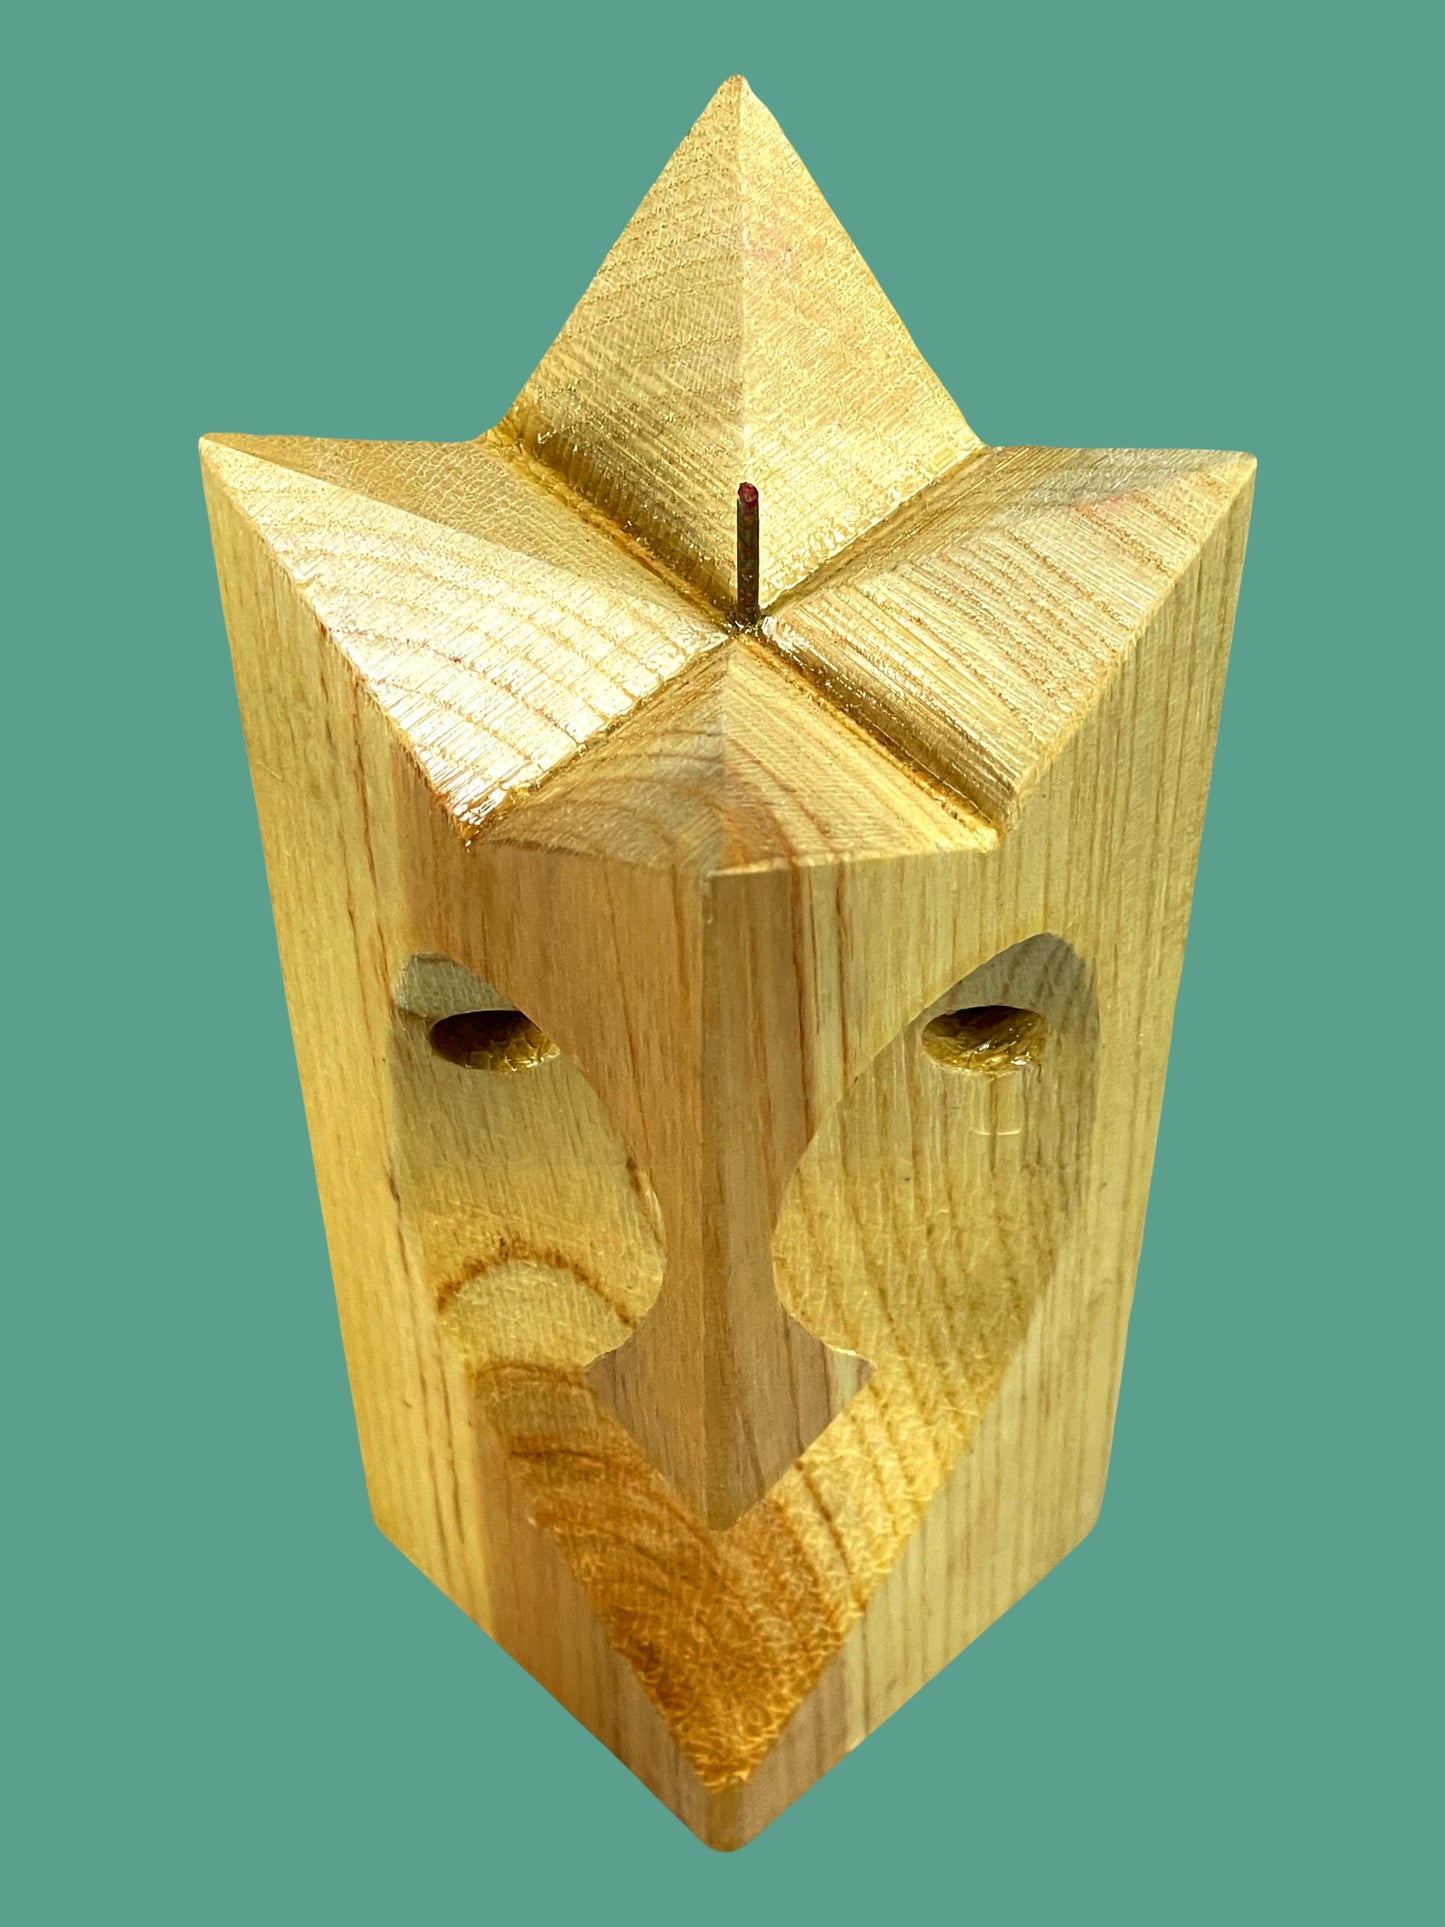 "King Head" playful pinewood single candle holder (2 pieces)